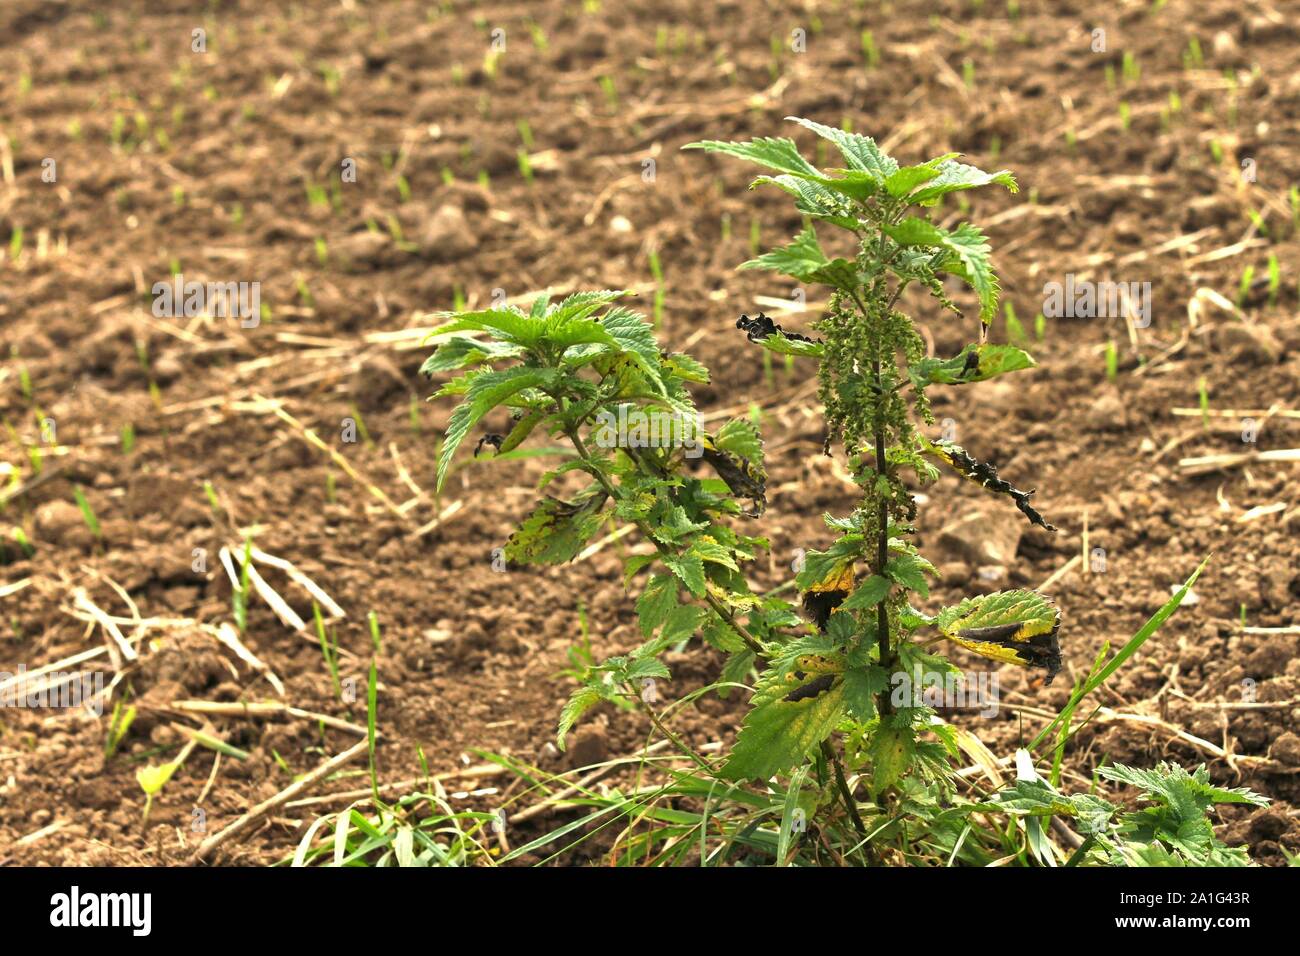 A single stubborn stinging nettle in front of a freshly plowed field. Stock Photo